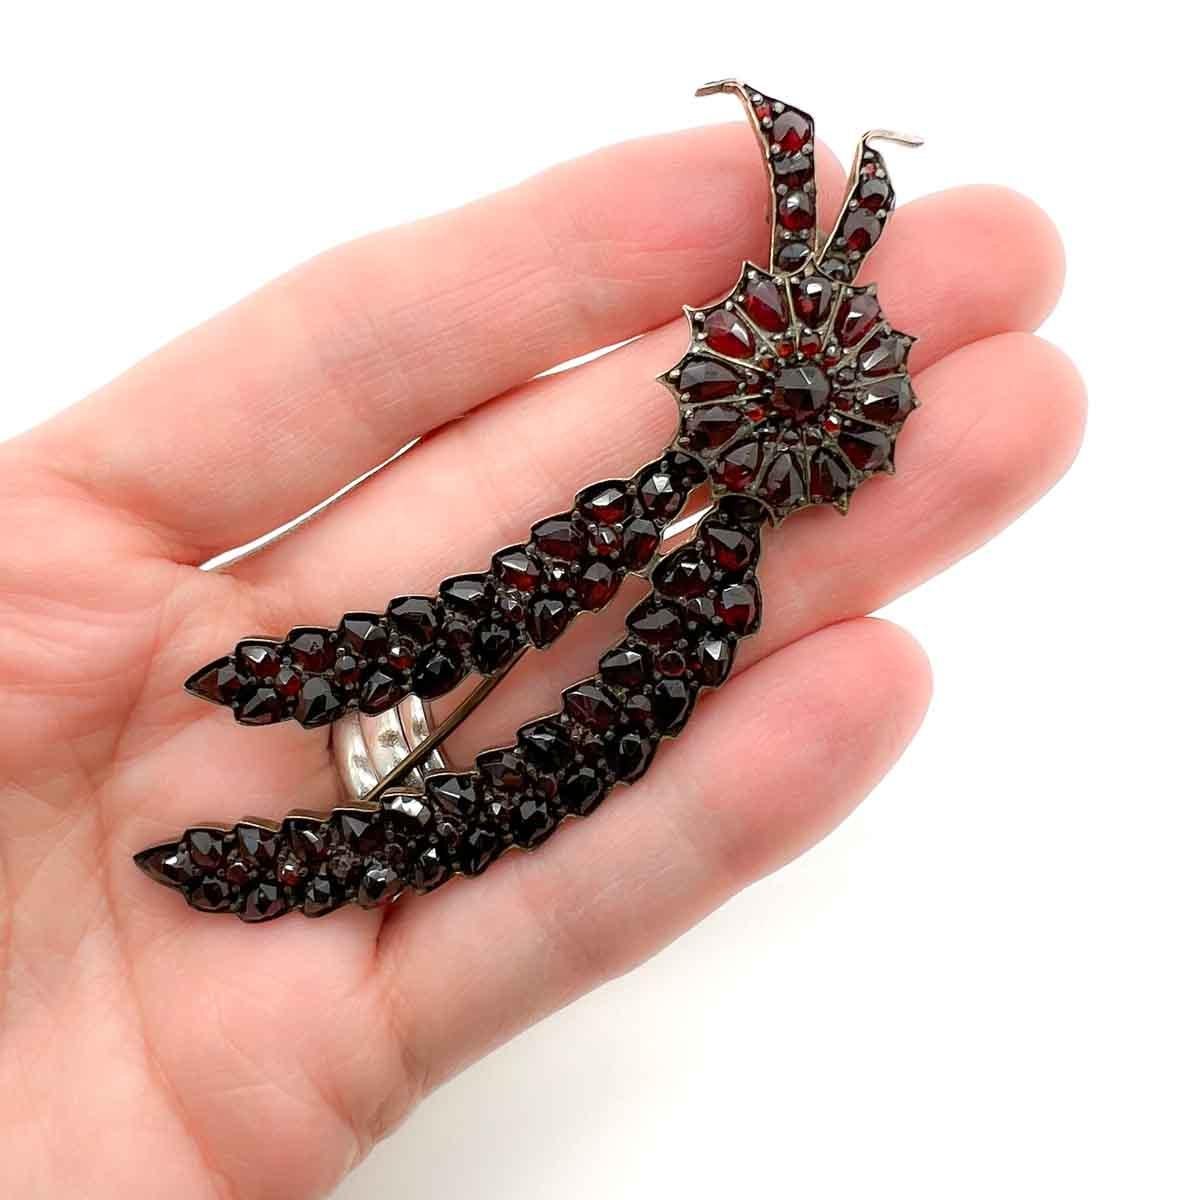 An original, Antique Bohemian Garnet Floral Spray from the late Victorian era, the 1880s. A large and delightful motif featuring a wheat sheaf pinned by a sunburst pave set with fancy rose cut stones. The variety of cuts creating a wonderful